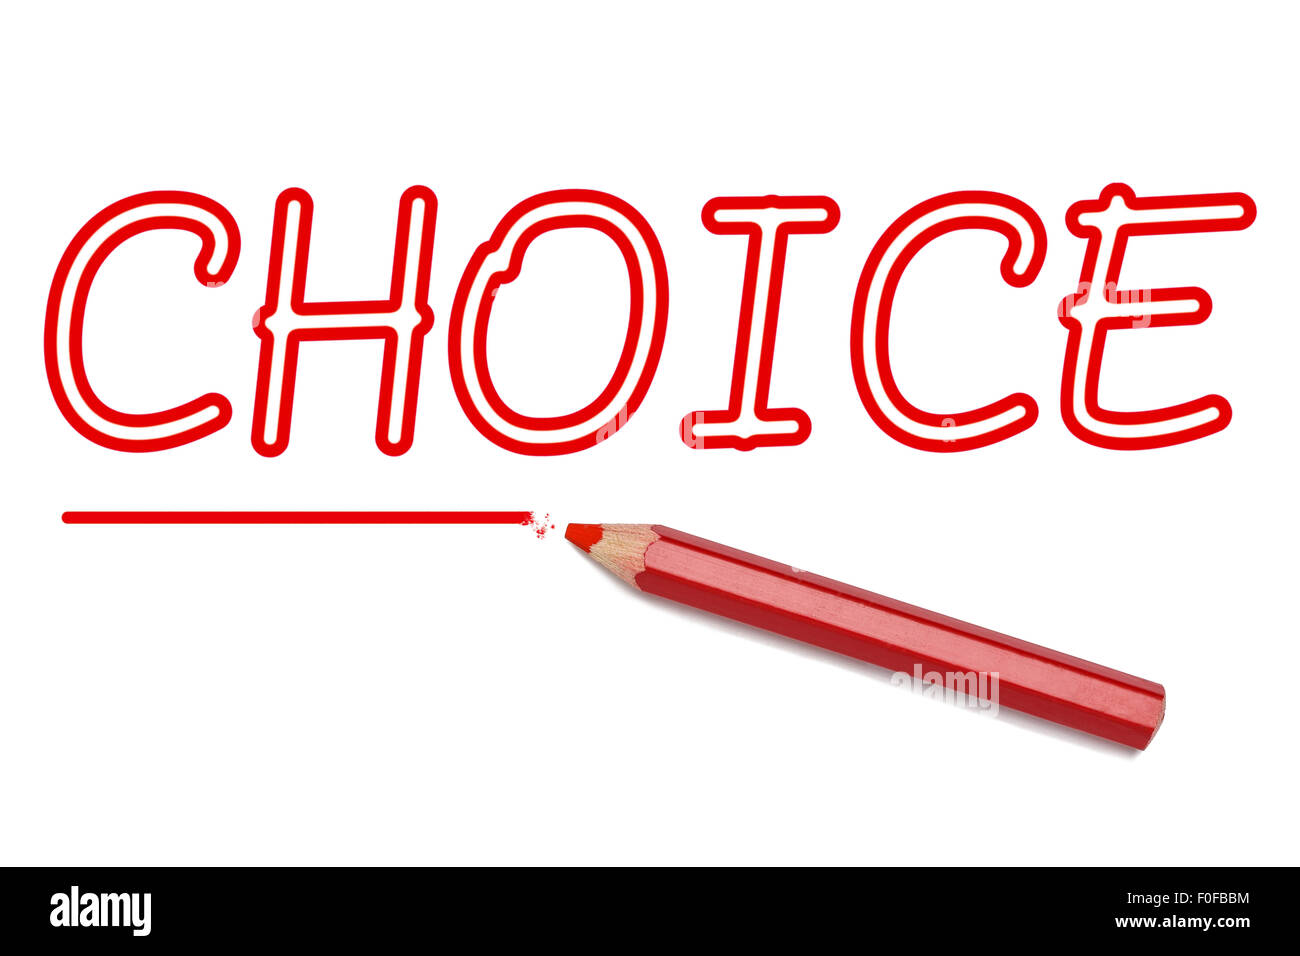 Choice text outline draw red pencil isolated on white background. Concept business, choice, decision, vision. Stock Photo